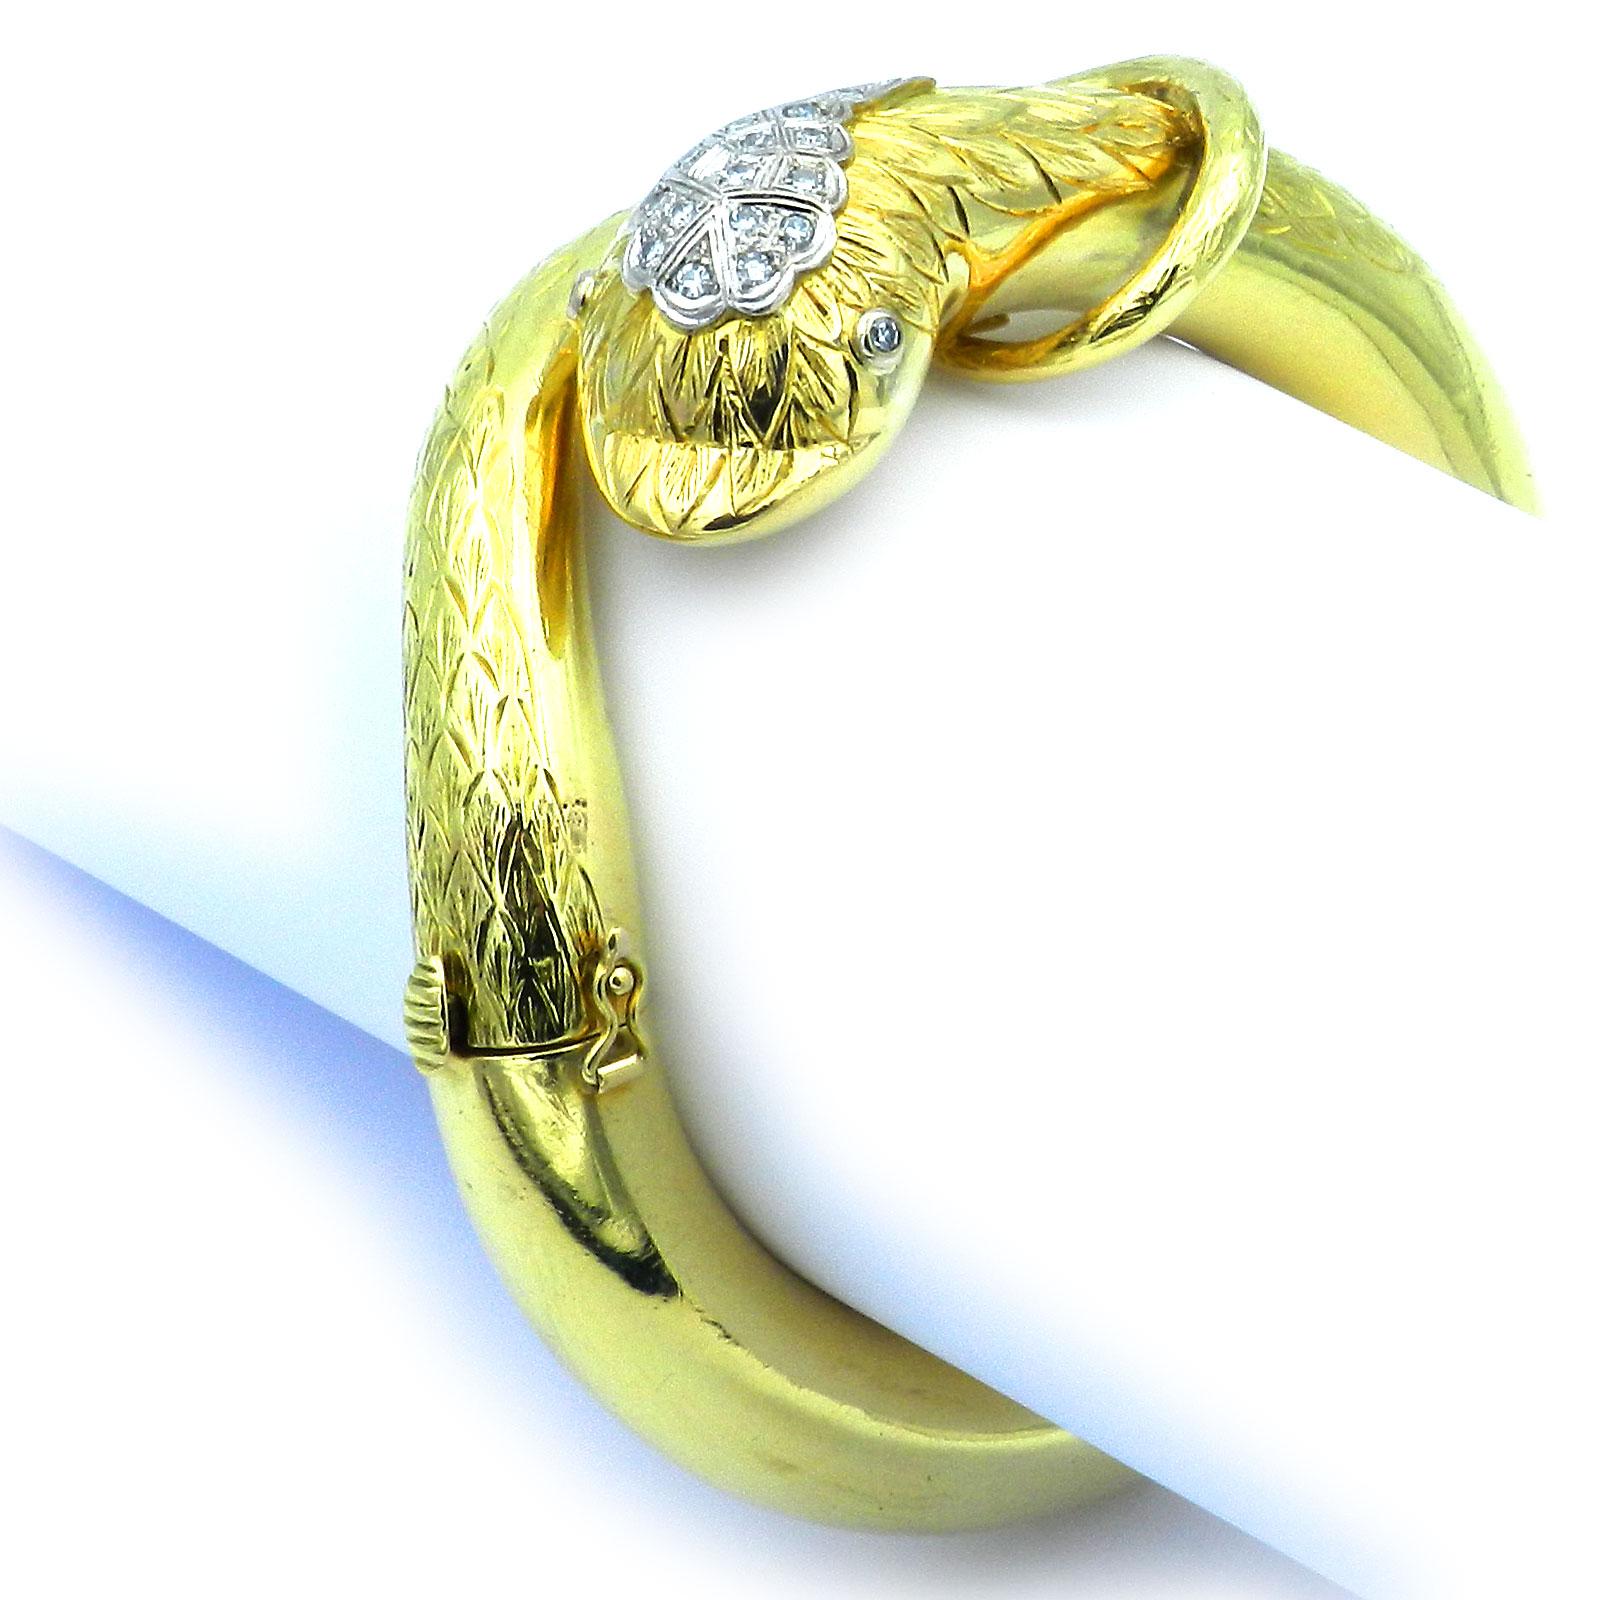 Vintage 18K Gold and 0.29 ct Diamond Snake Bangle Bracelet

Very decorative and unusual snake bangle with hinge in heavy workmanship, the top finely chased, the head and the eyes set with a total of 16 diamonds totaling 0.29 ct H/si, set in white